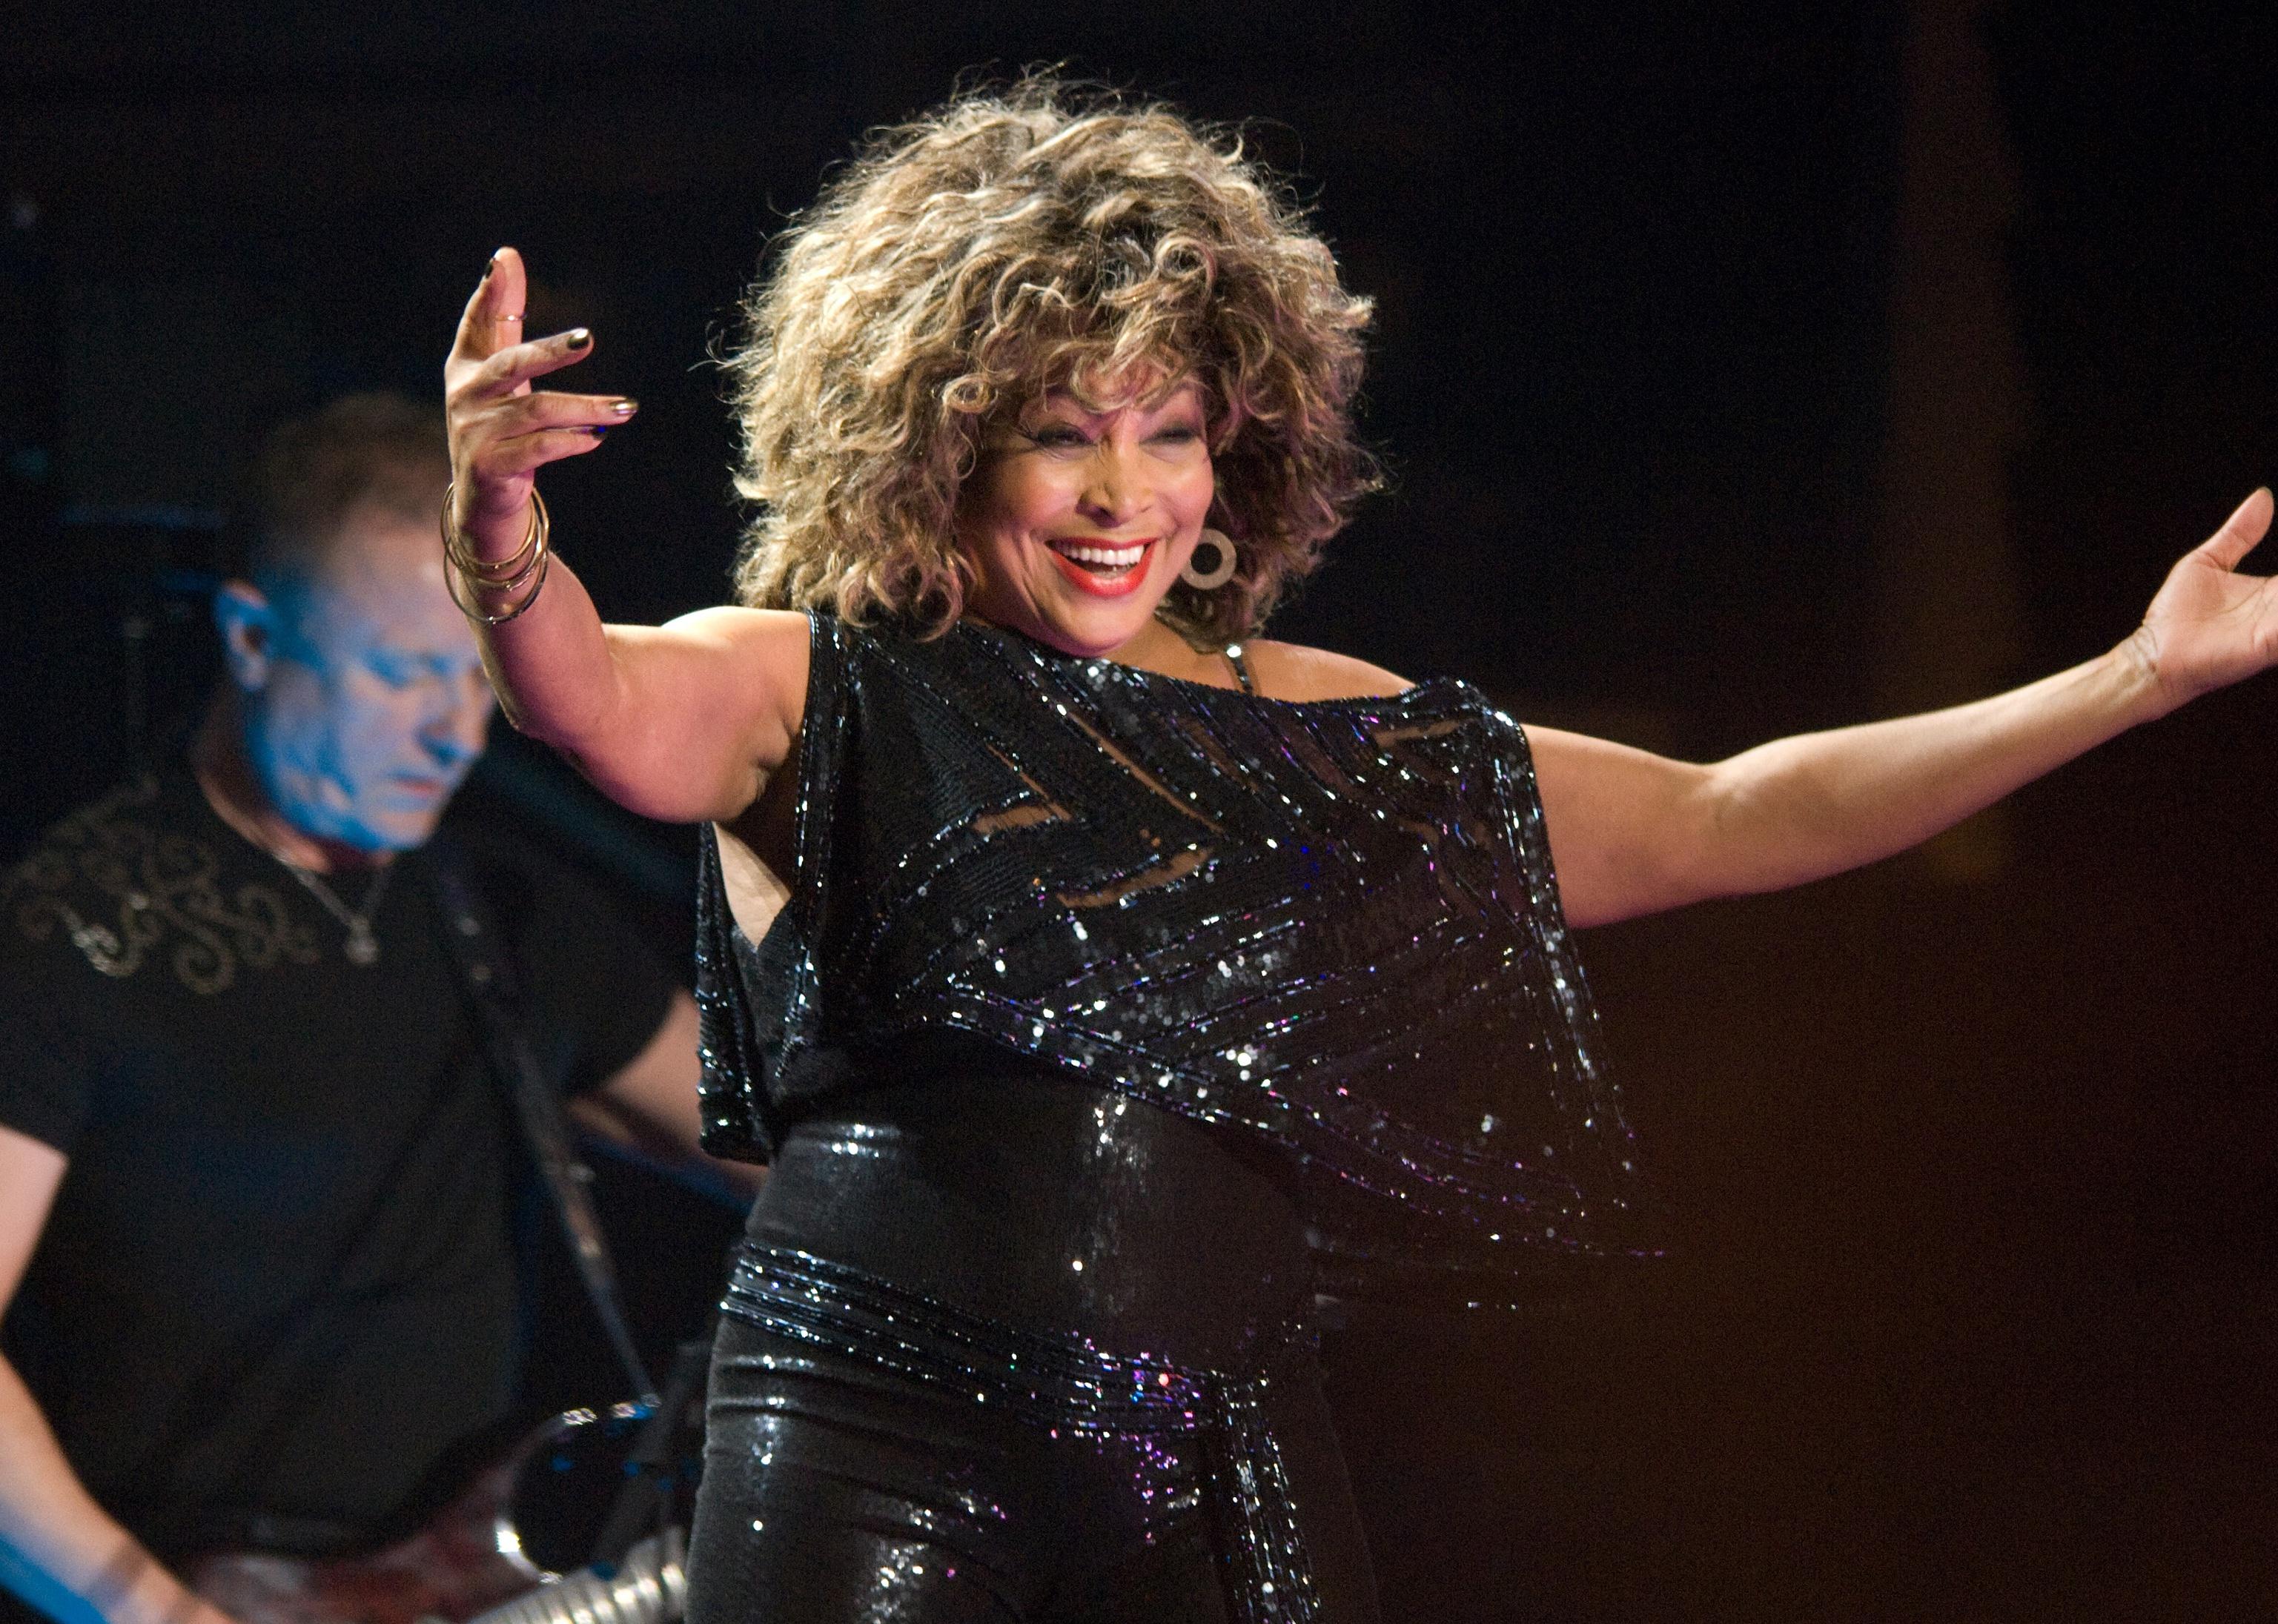 Tina Turner performs on stage at the GelreDome.